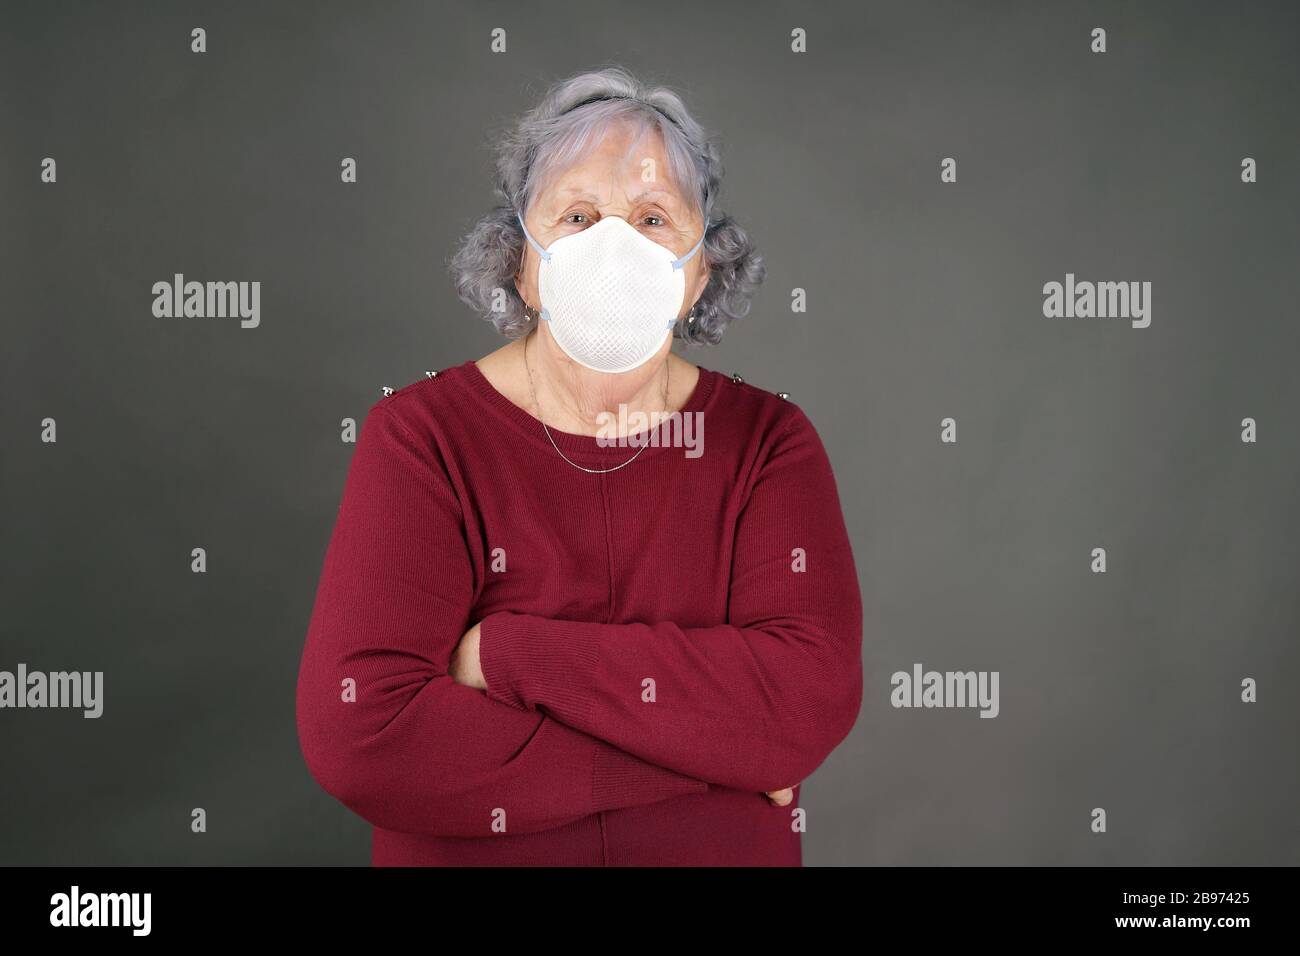 Senior woman with medical mask arms crossed coronavirus pandemic concept Stock Photo